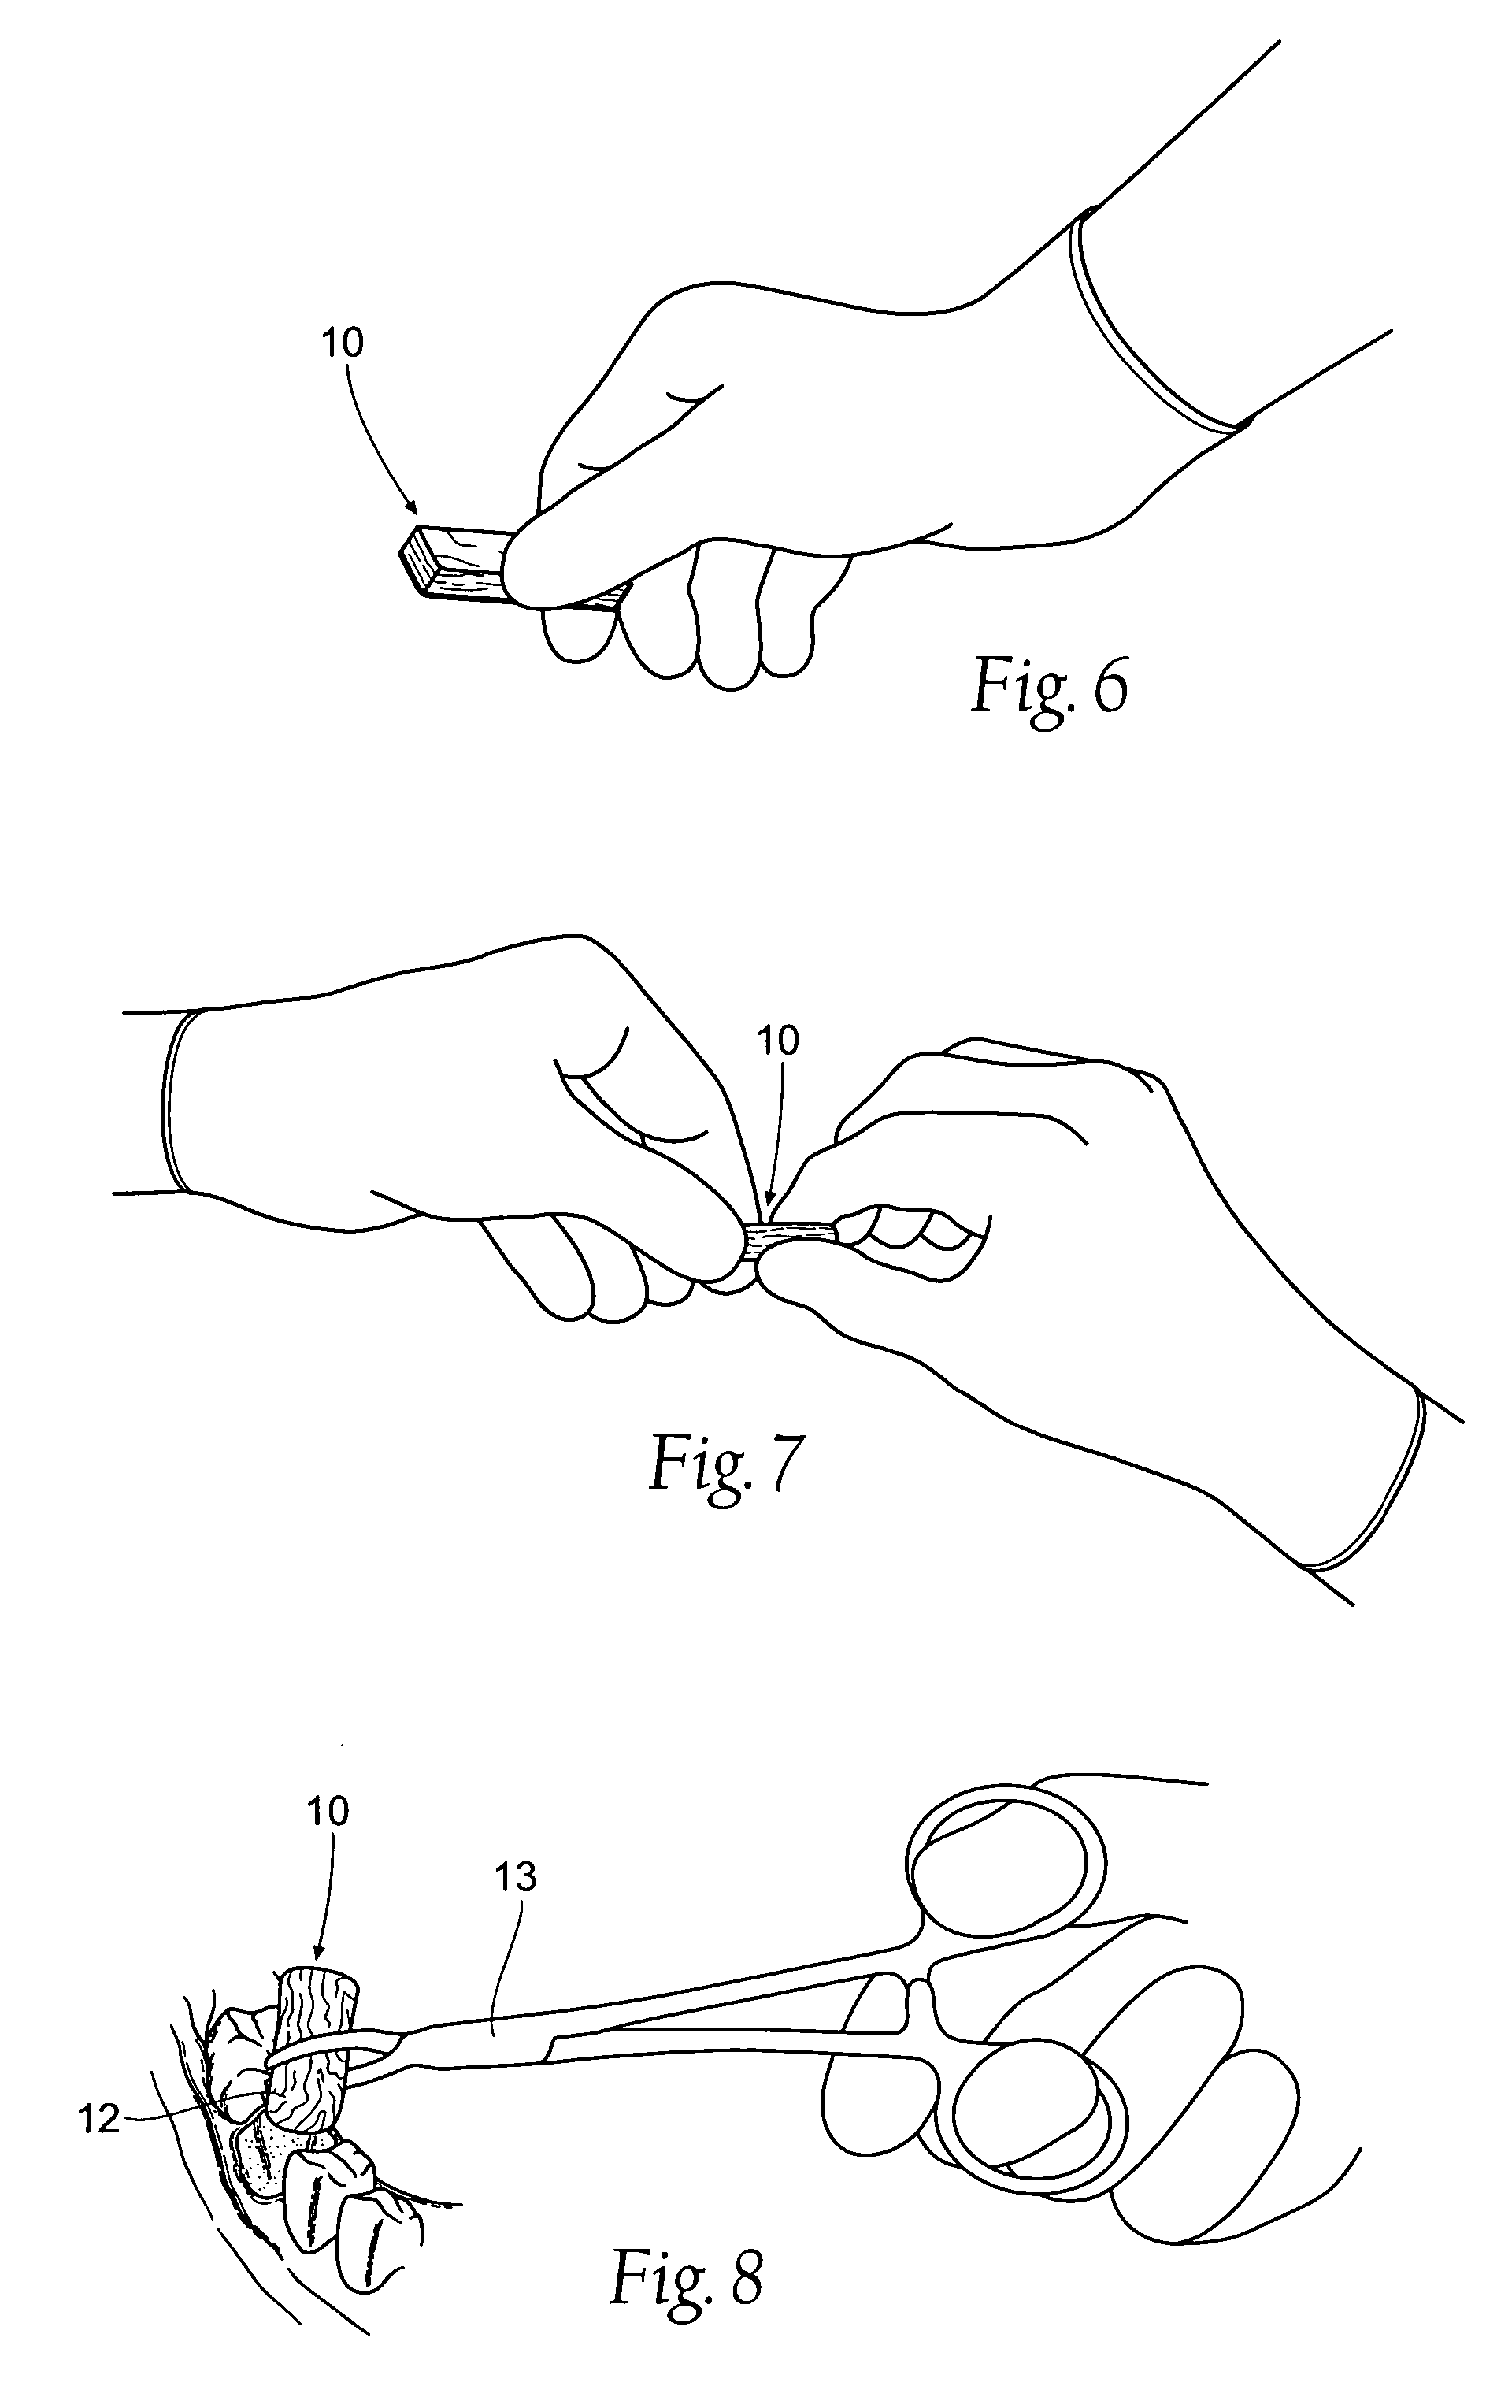 Compositions, assemblies, and methods applied during or after a dental procedure to ameliorate fluid loss and/or promote healing, using a hydrophilic polymer sponge structure such as chitosan